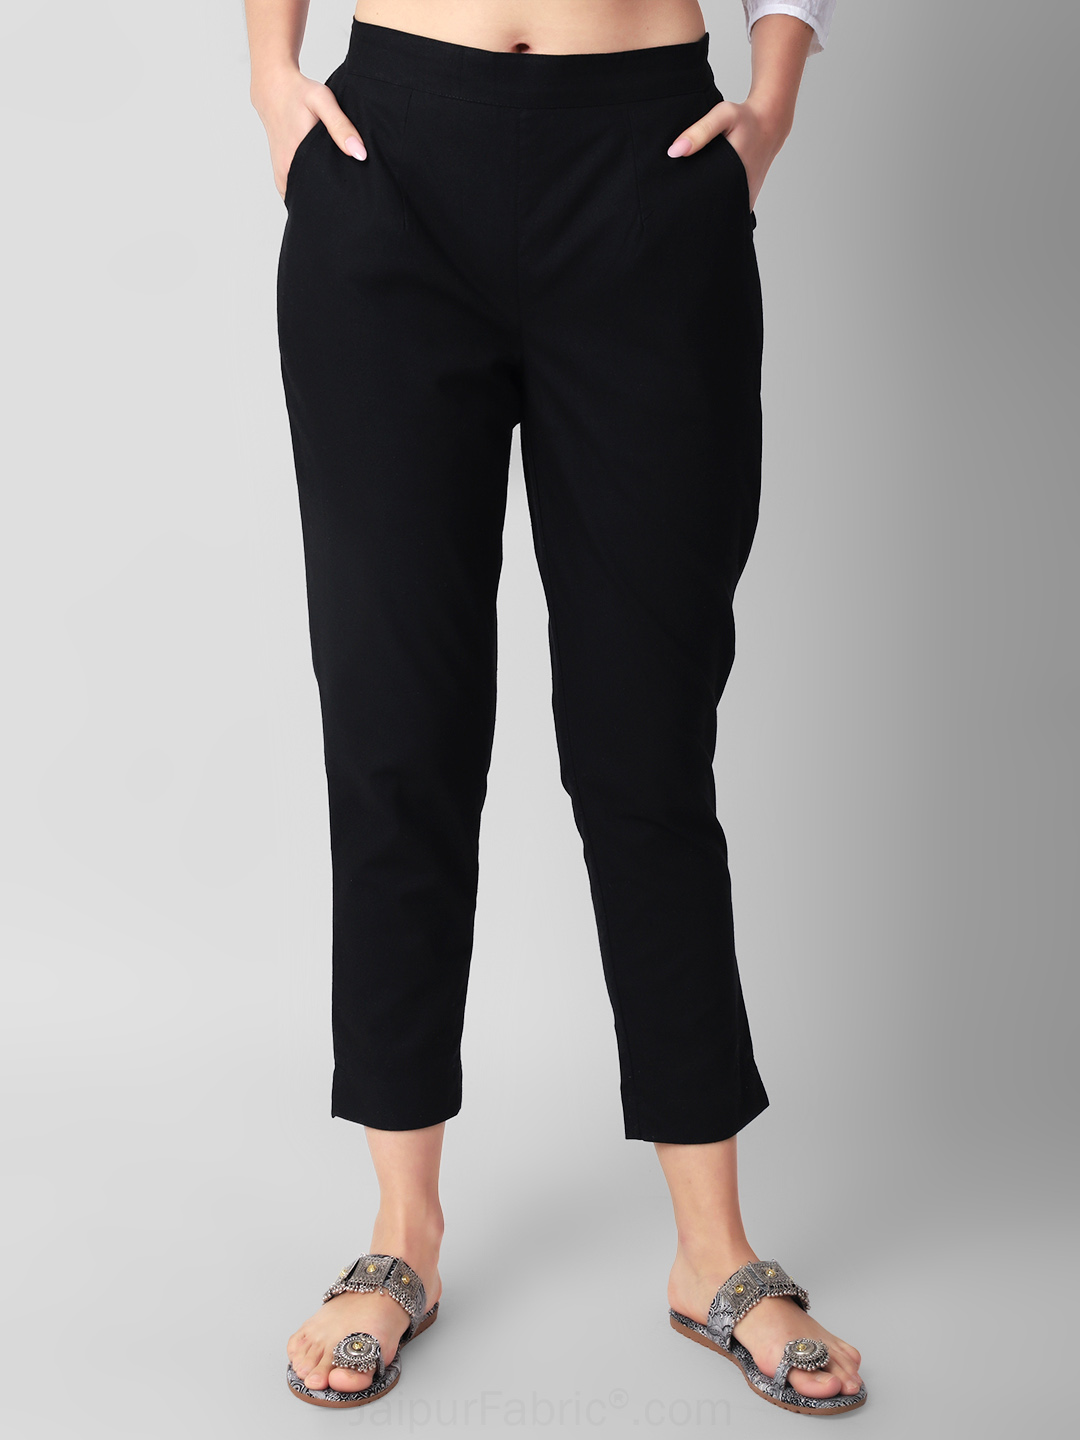 Jet Black Women Cotton Pants casual and semi formal daily trousers